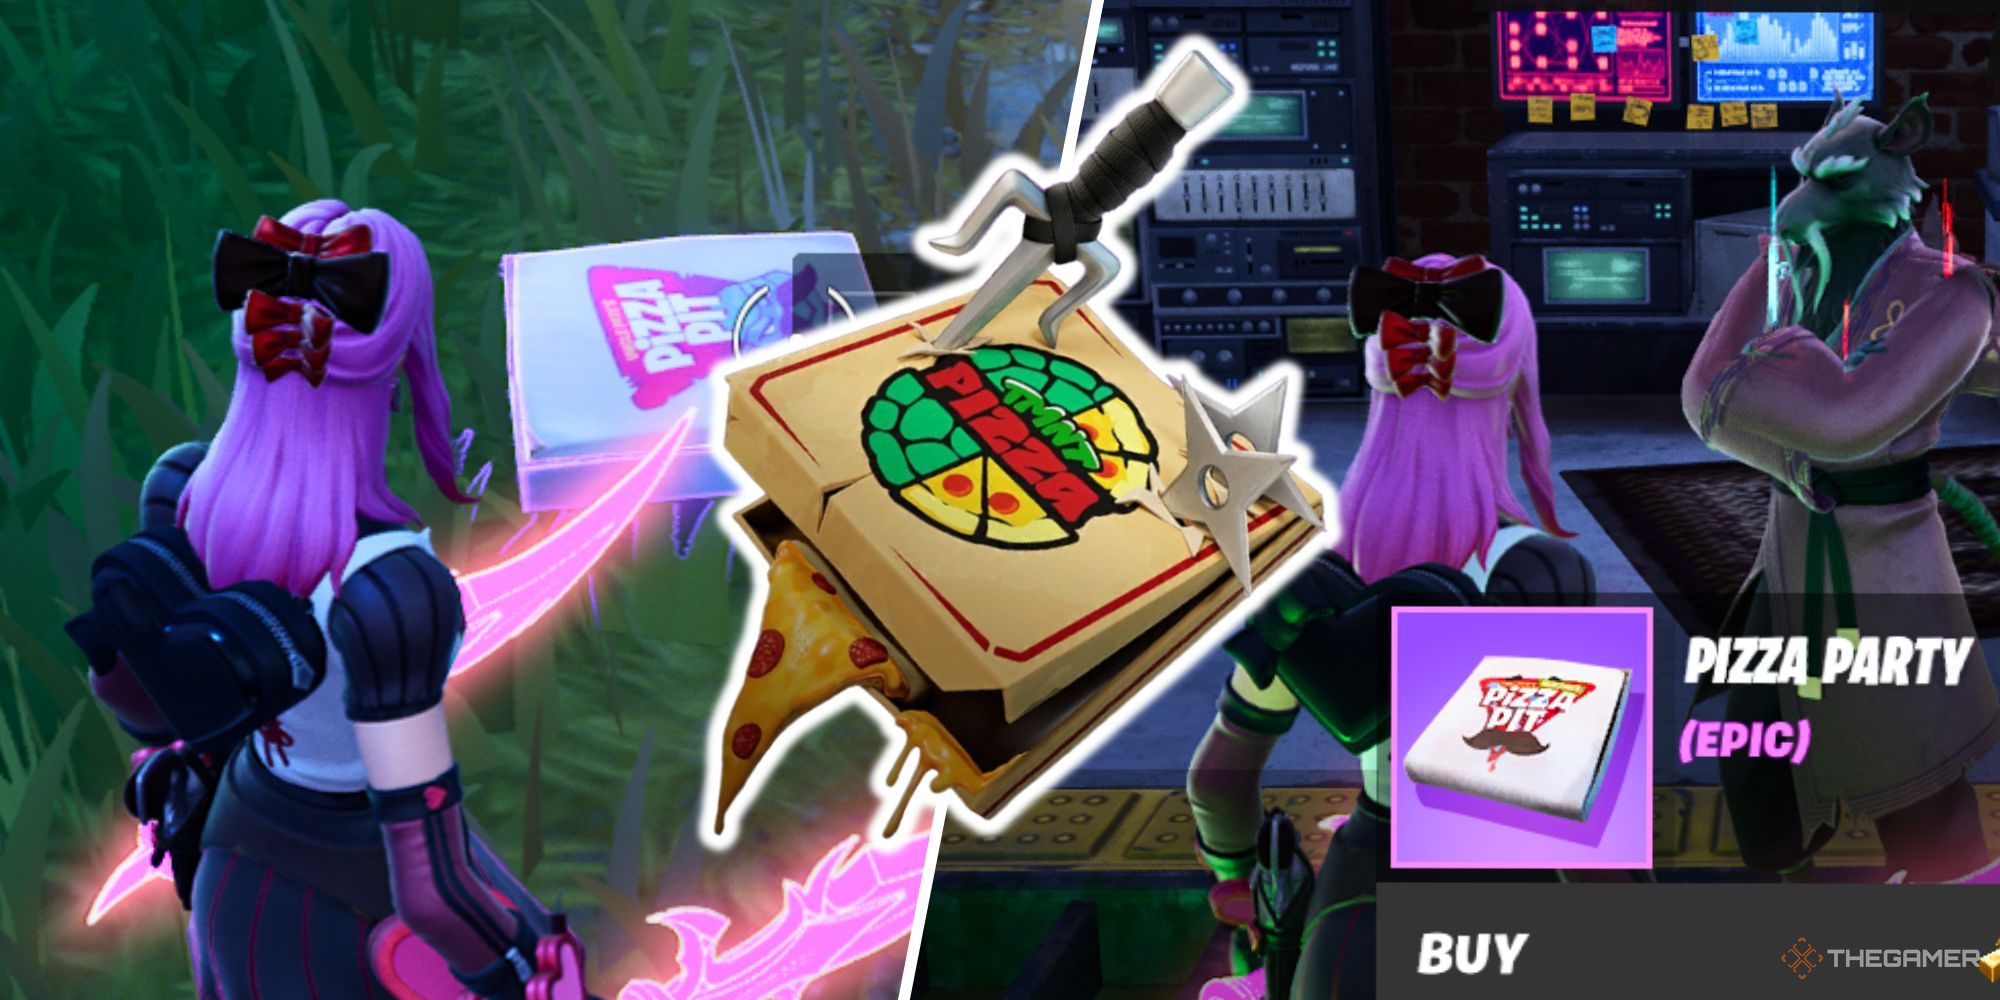 pizza party split image from fortnite 